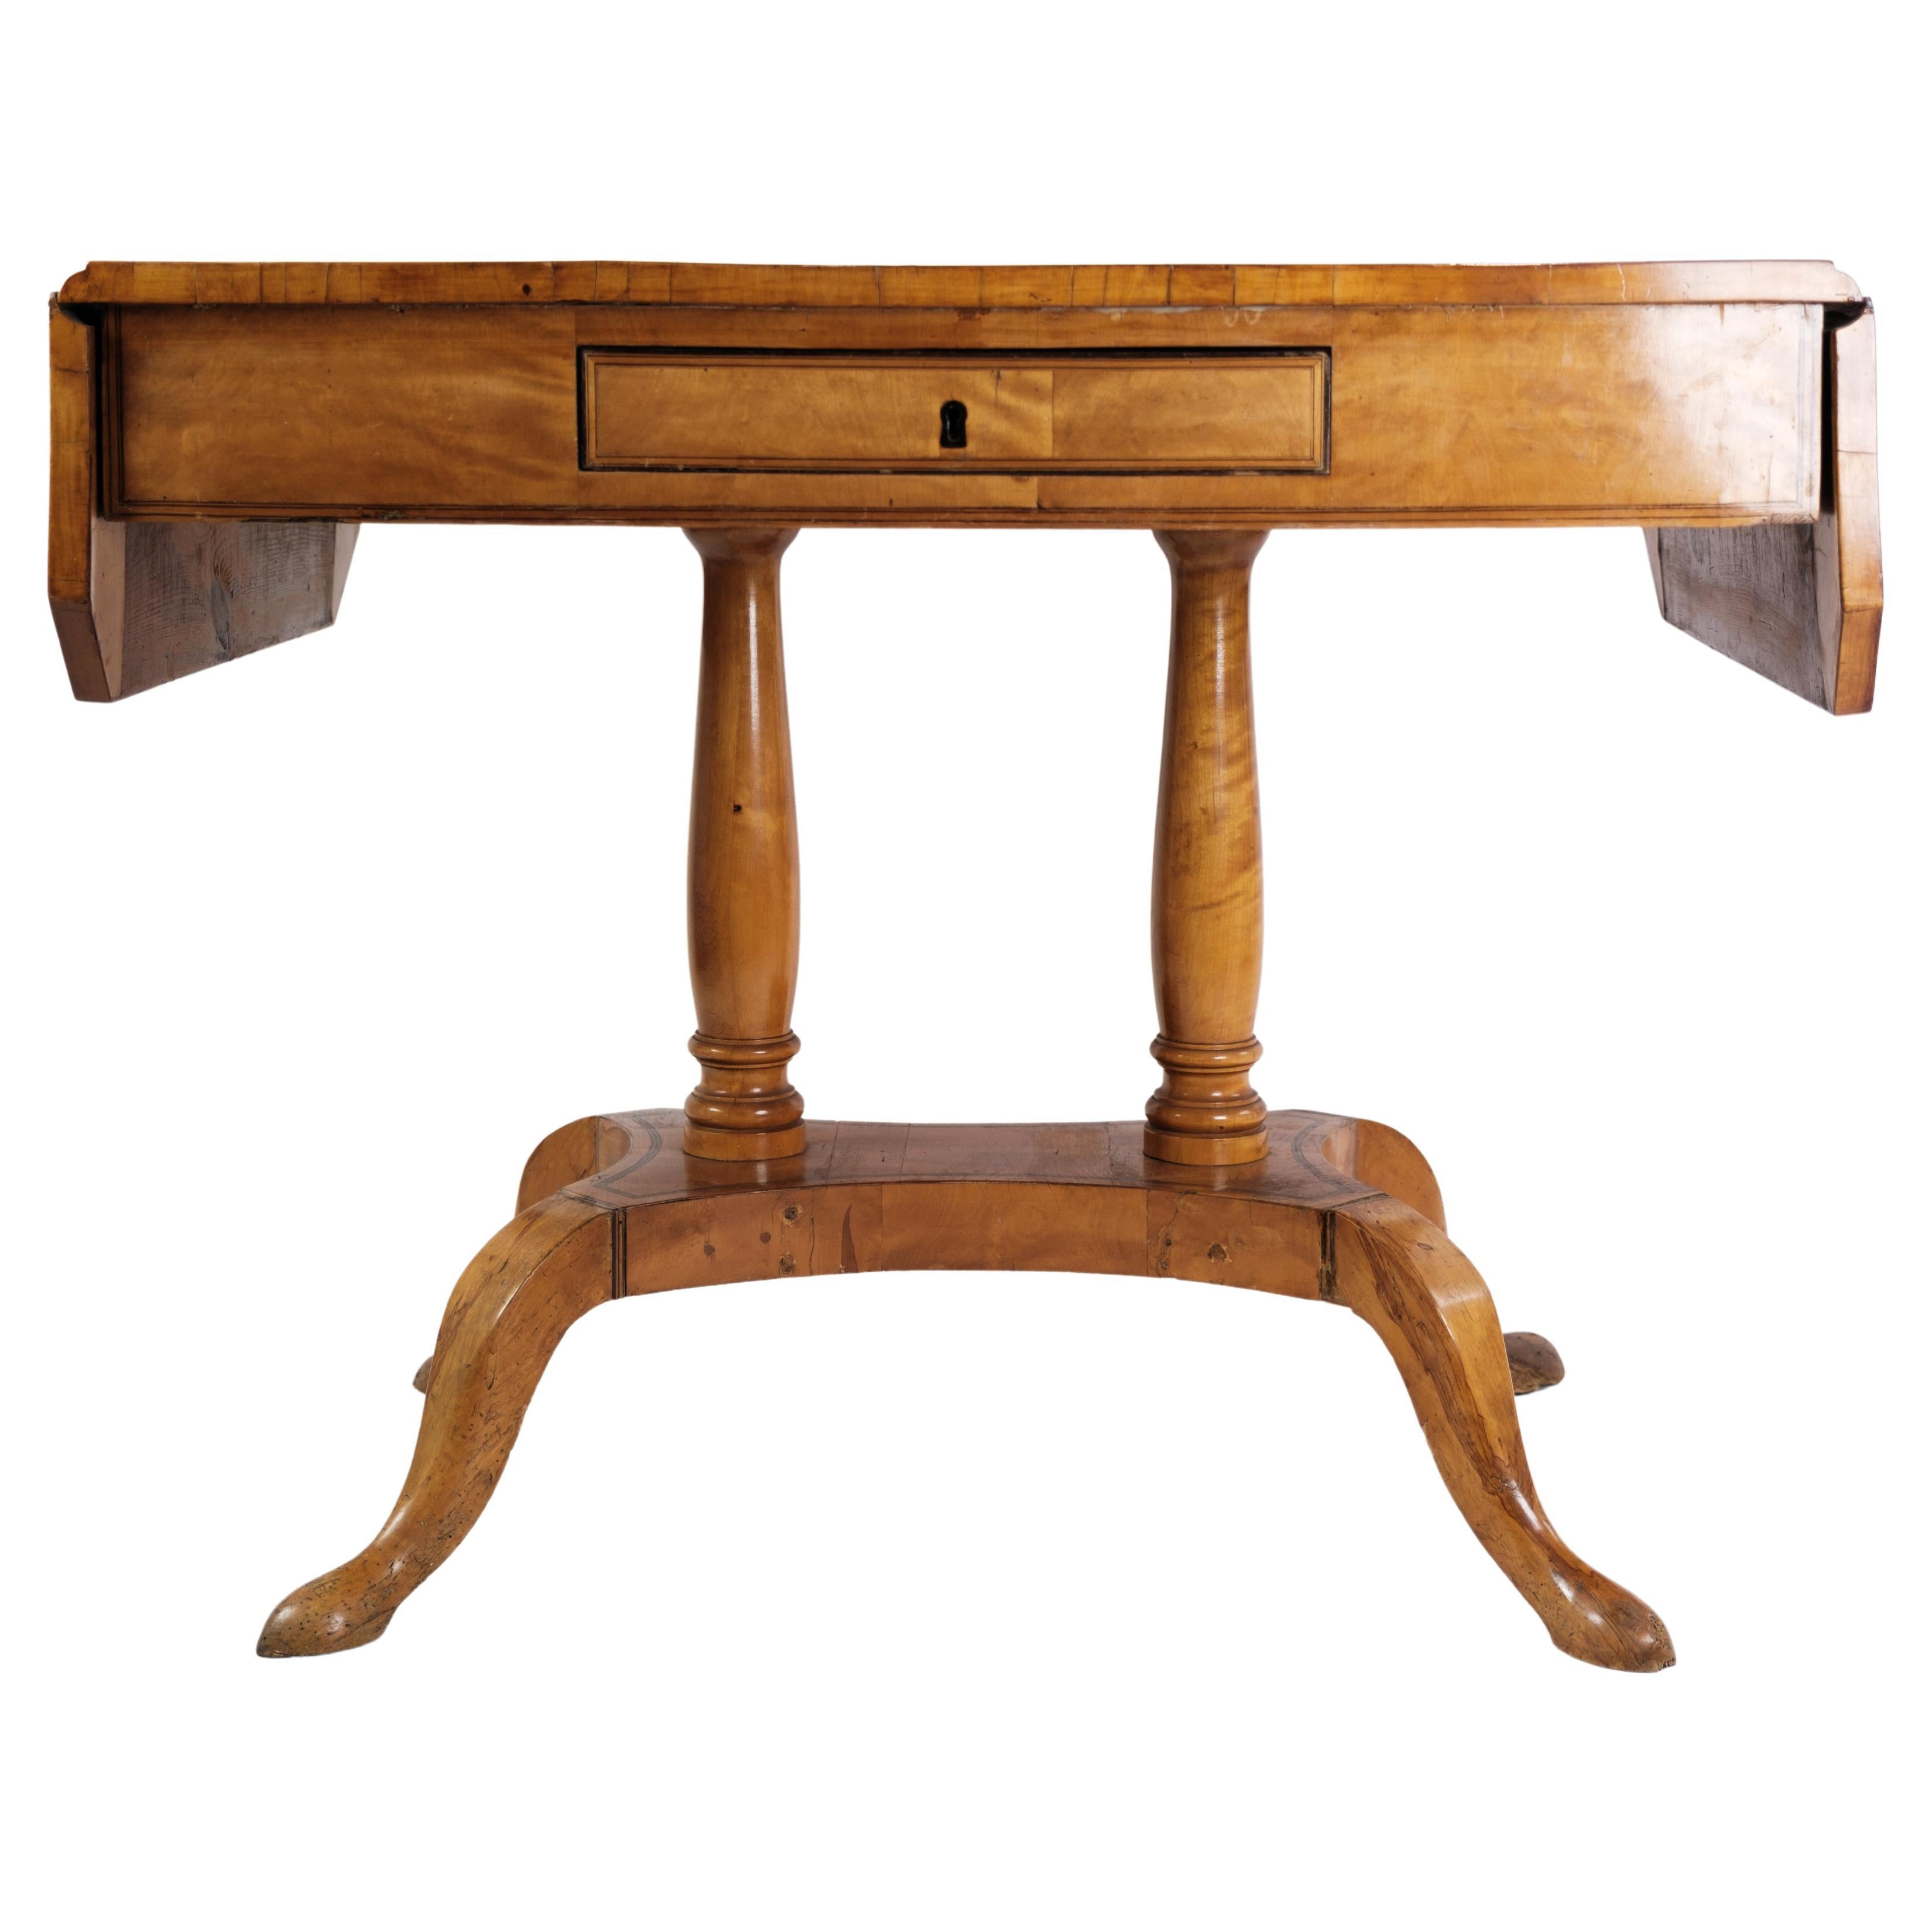 Antique Empire Table with Flaps and Marquetry in Birch Wood from 1840s For Sale